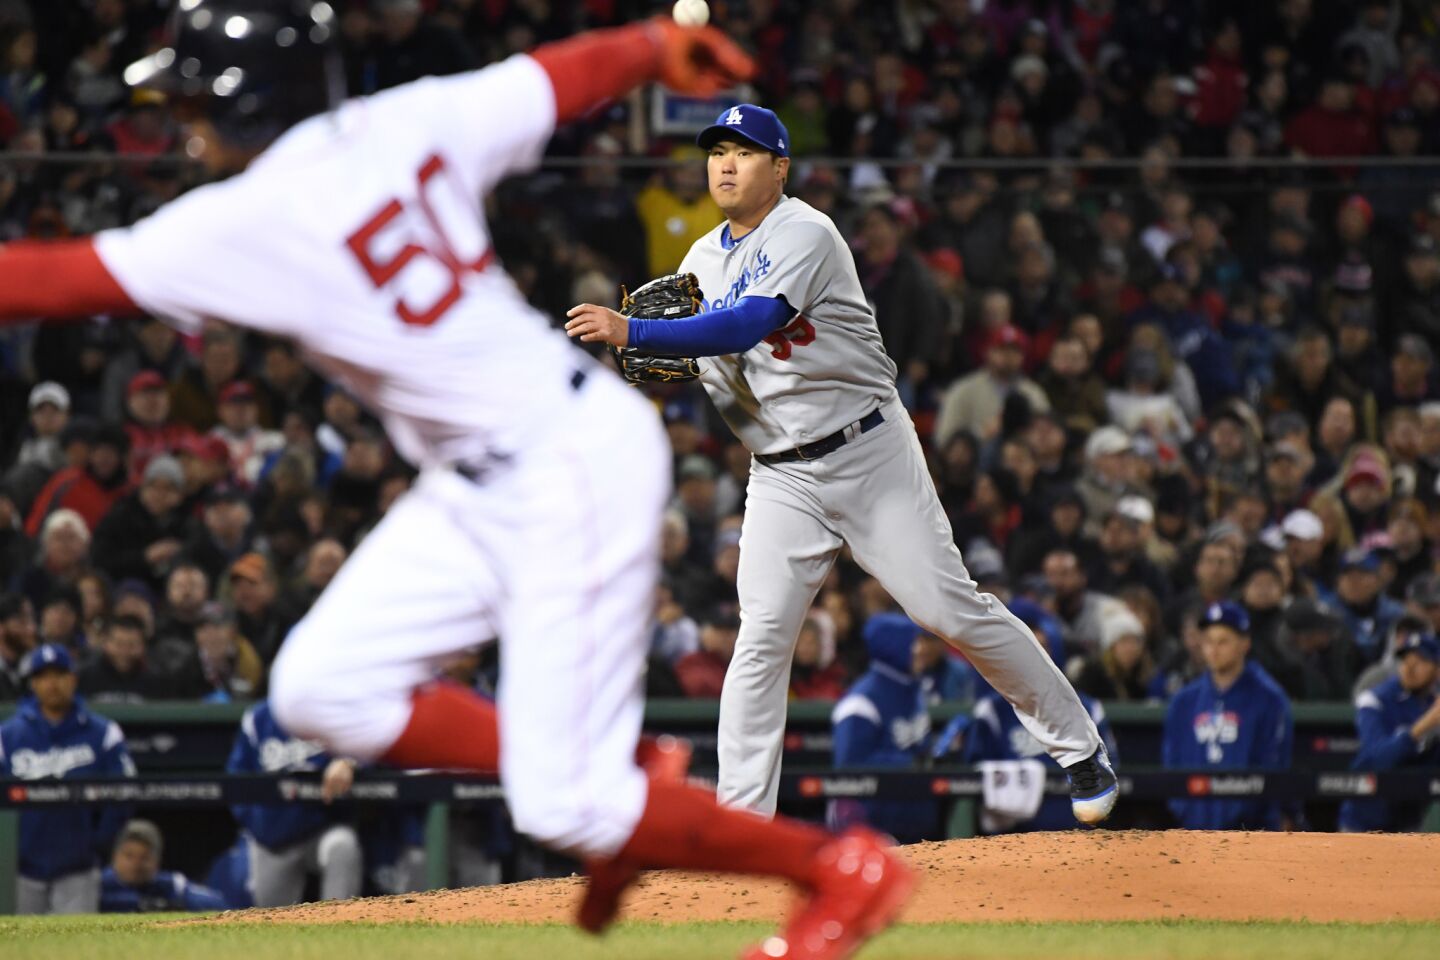 Dodgers pitcher Hyun-Jin Ryu throws to first as Red Sox's Mookiie Betts dives back.